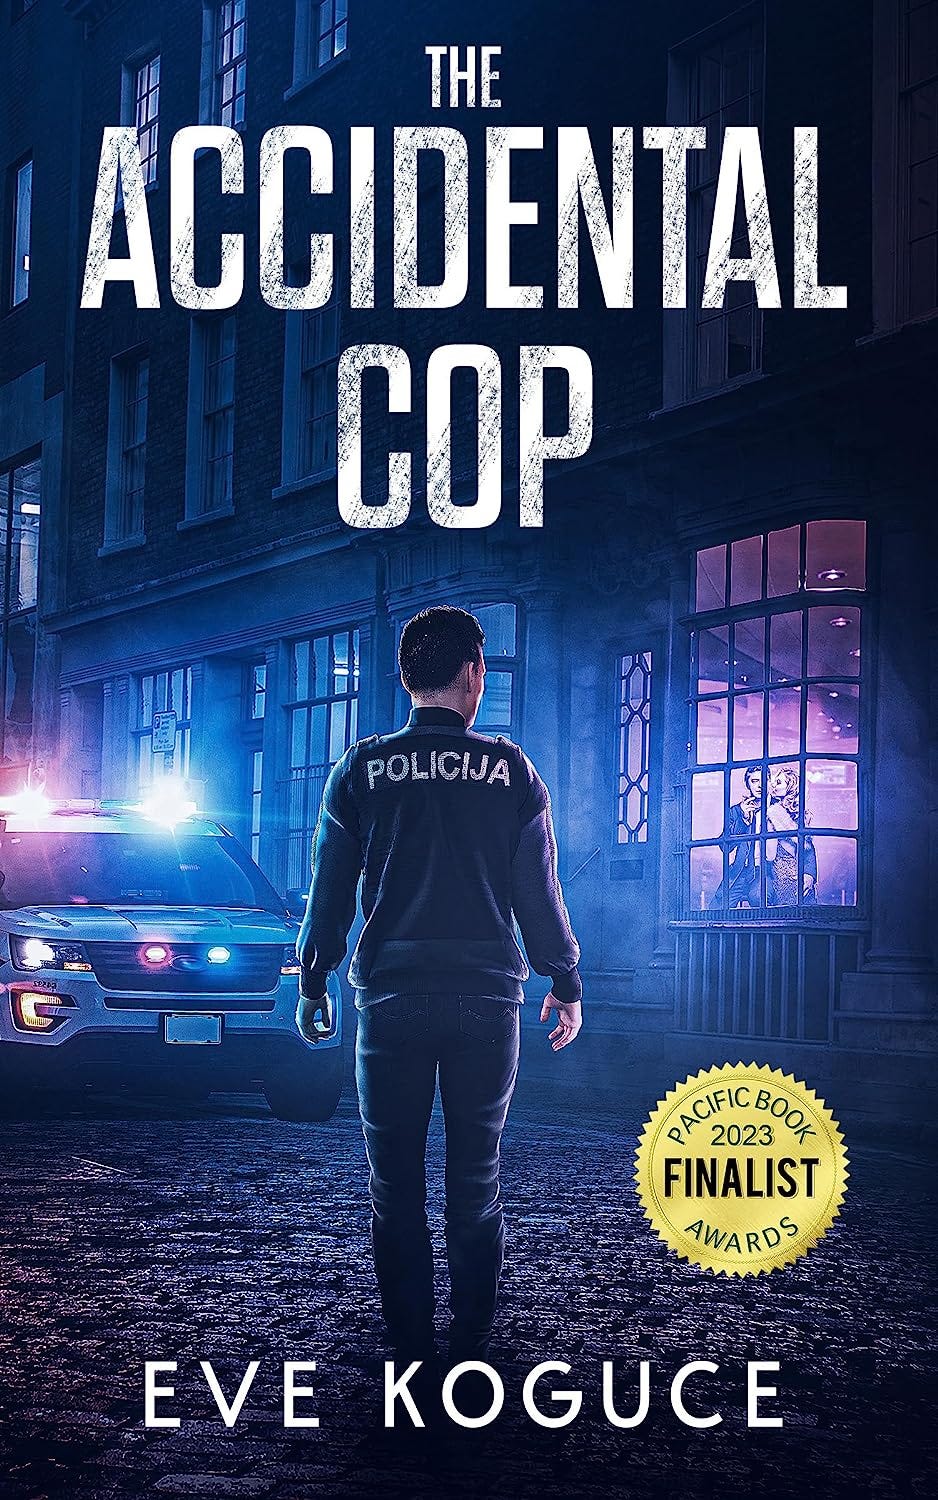 Book cover of The Accidental Copy by Eve Koguce, showing a policeman at night.